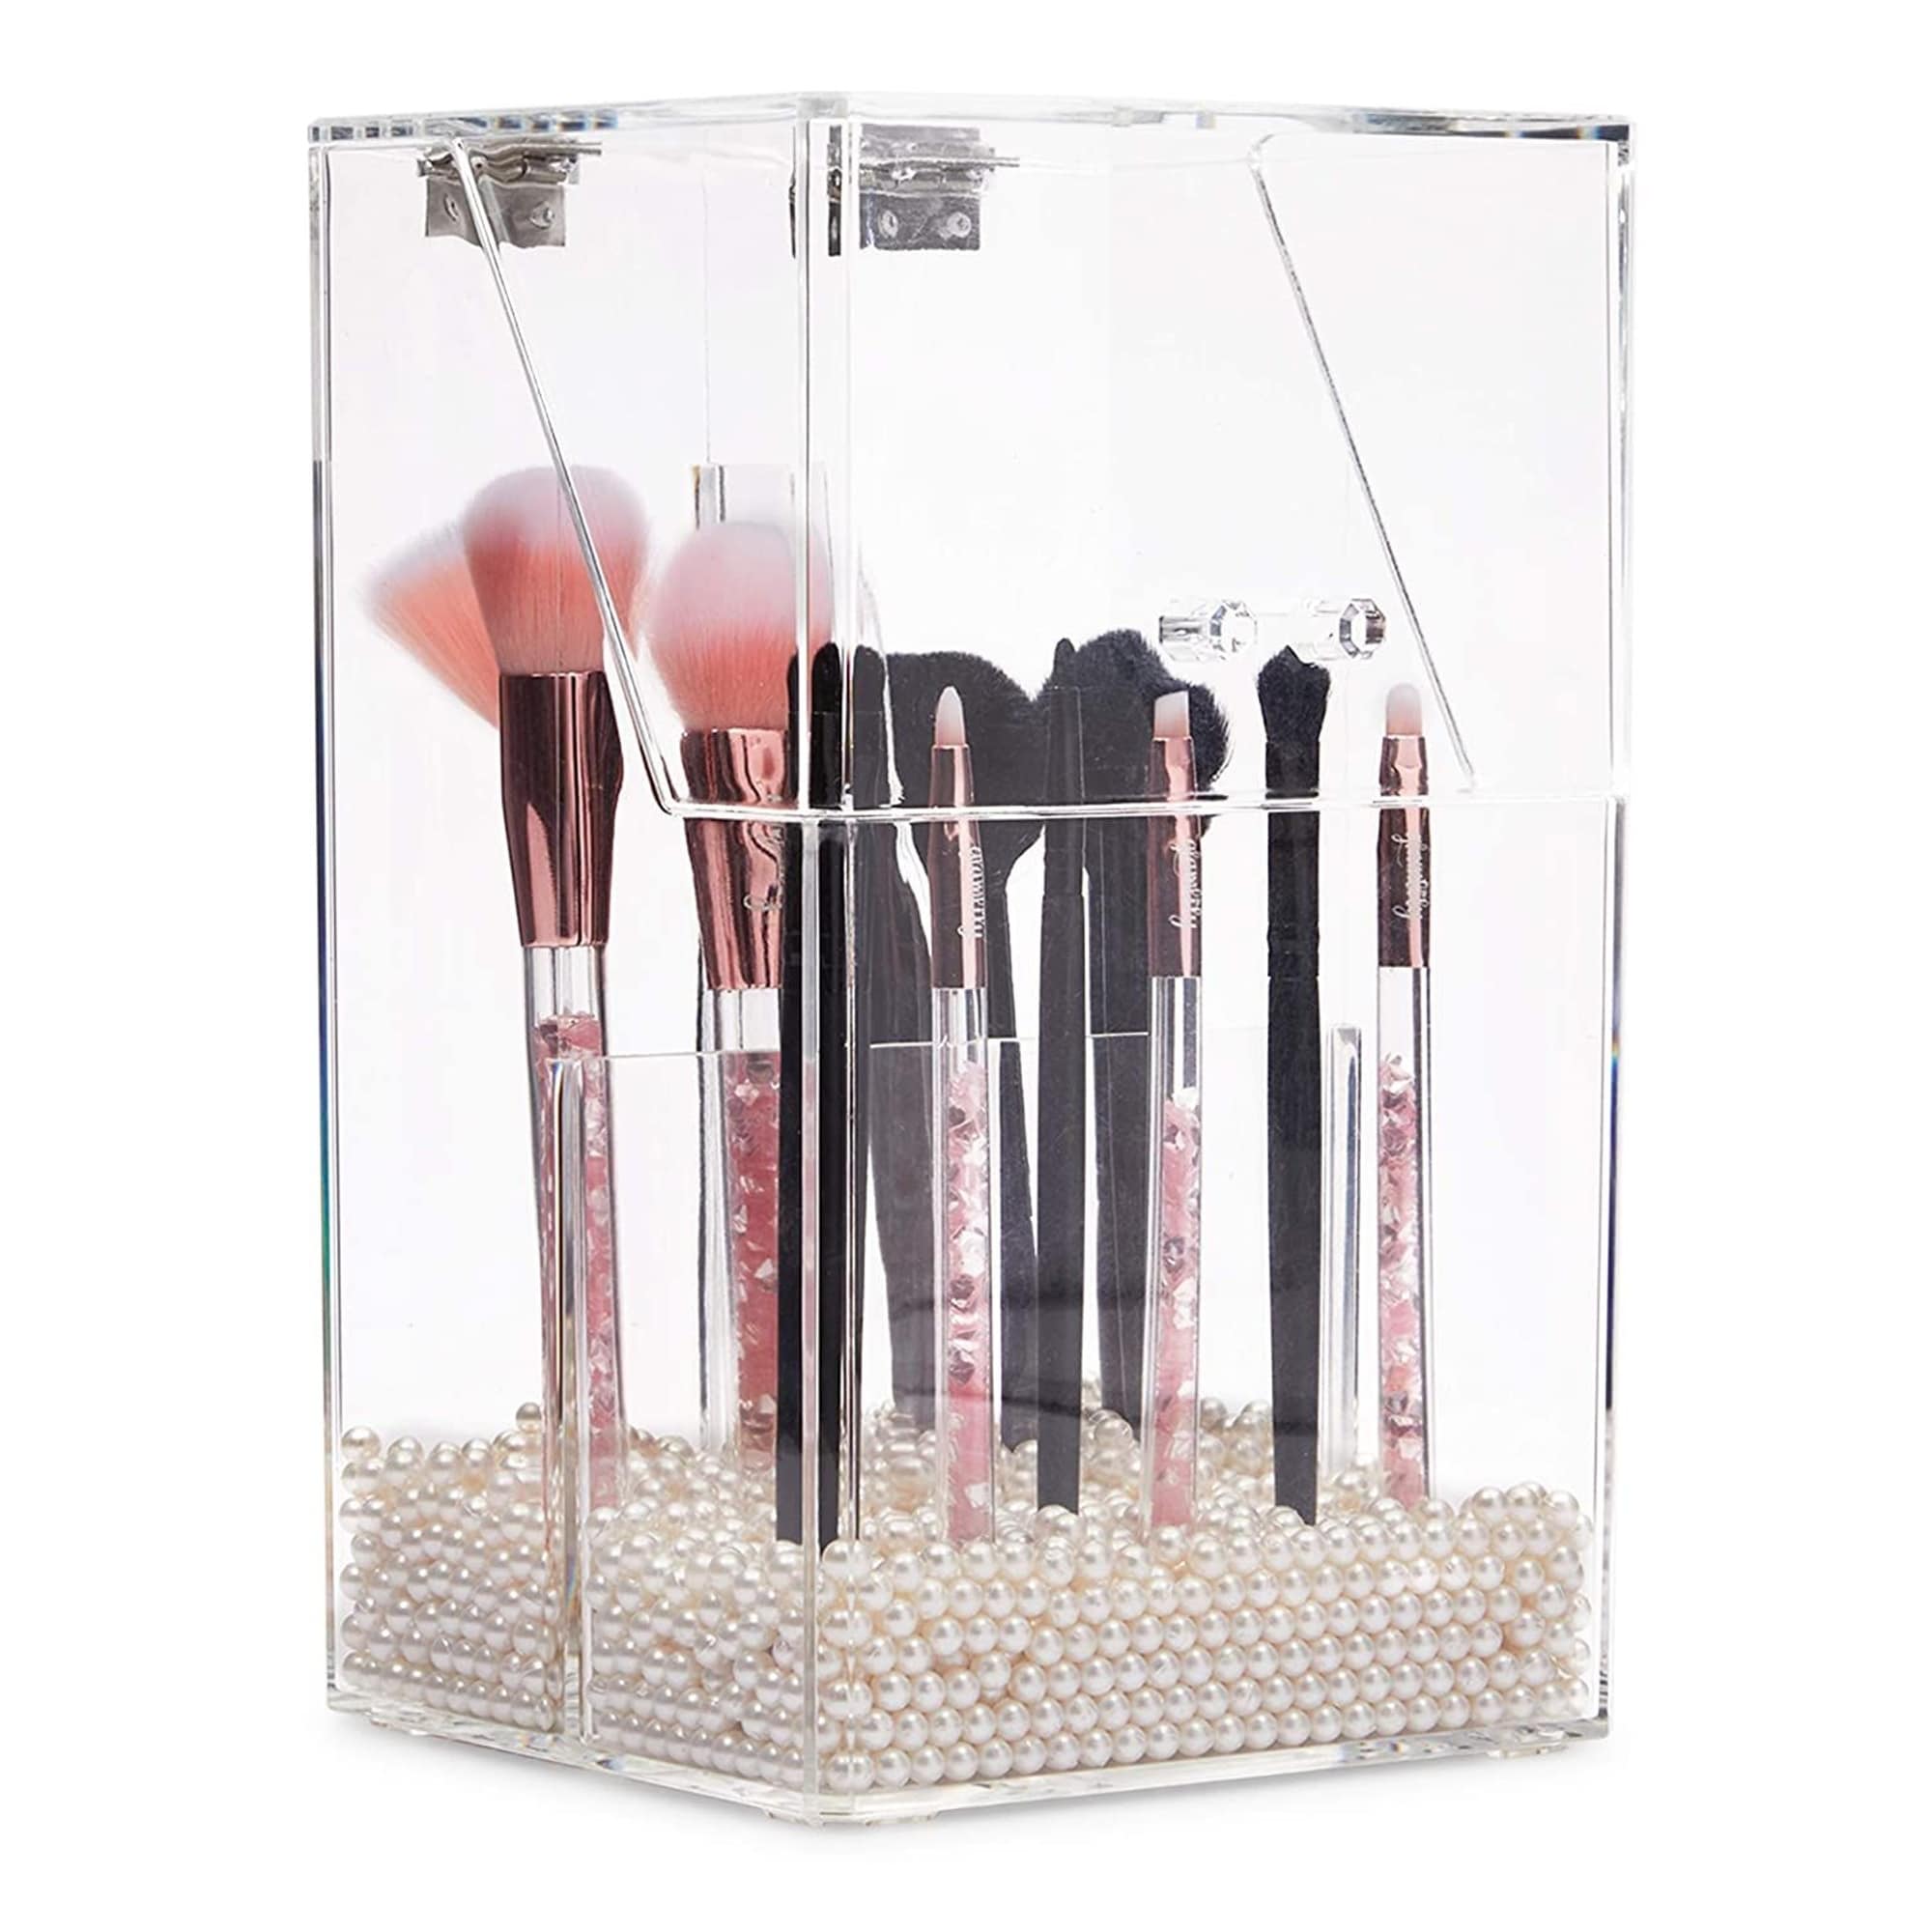 Retractable Makeup Brush Holders, Clear Travel Makeup Brush Case